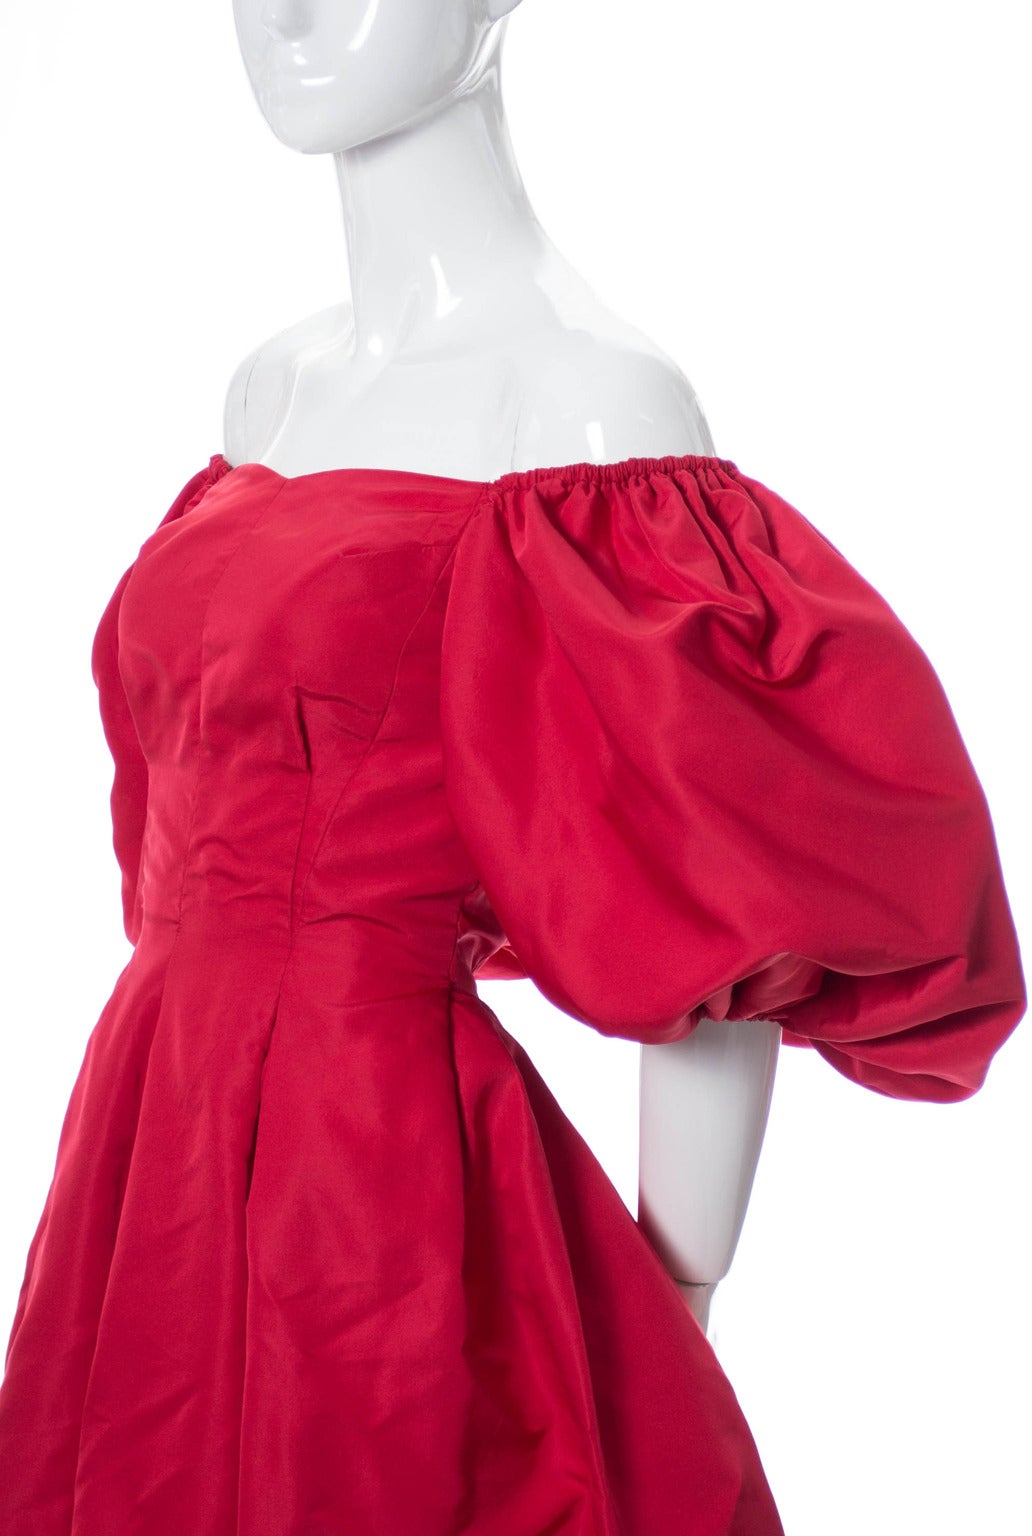 Rosalie MaCrini 1950's red satin formal vintage dress In Excellent Condition In Portland, OR